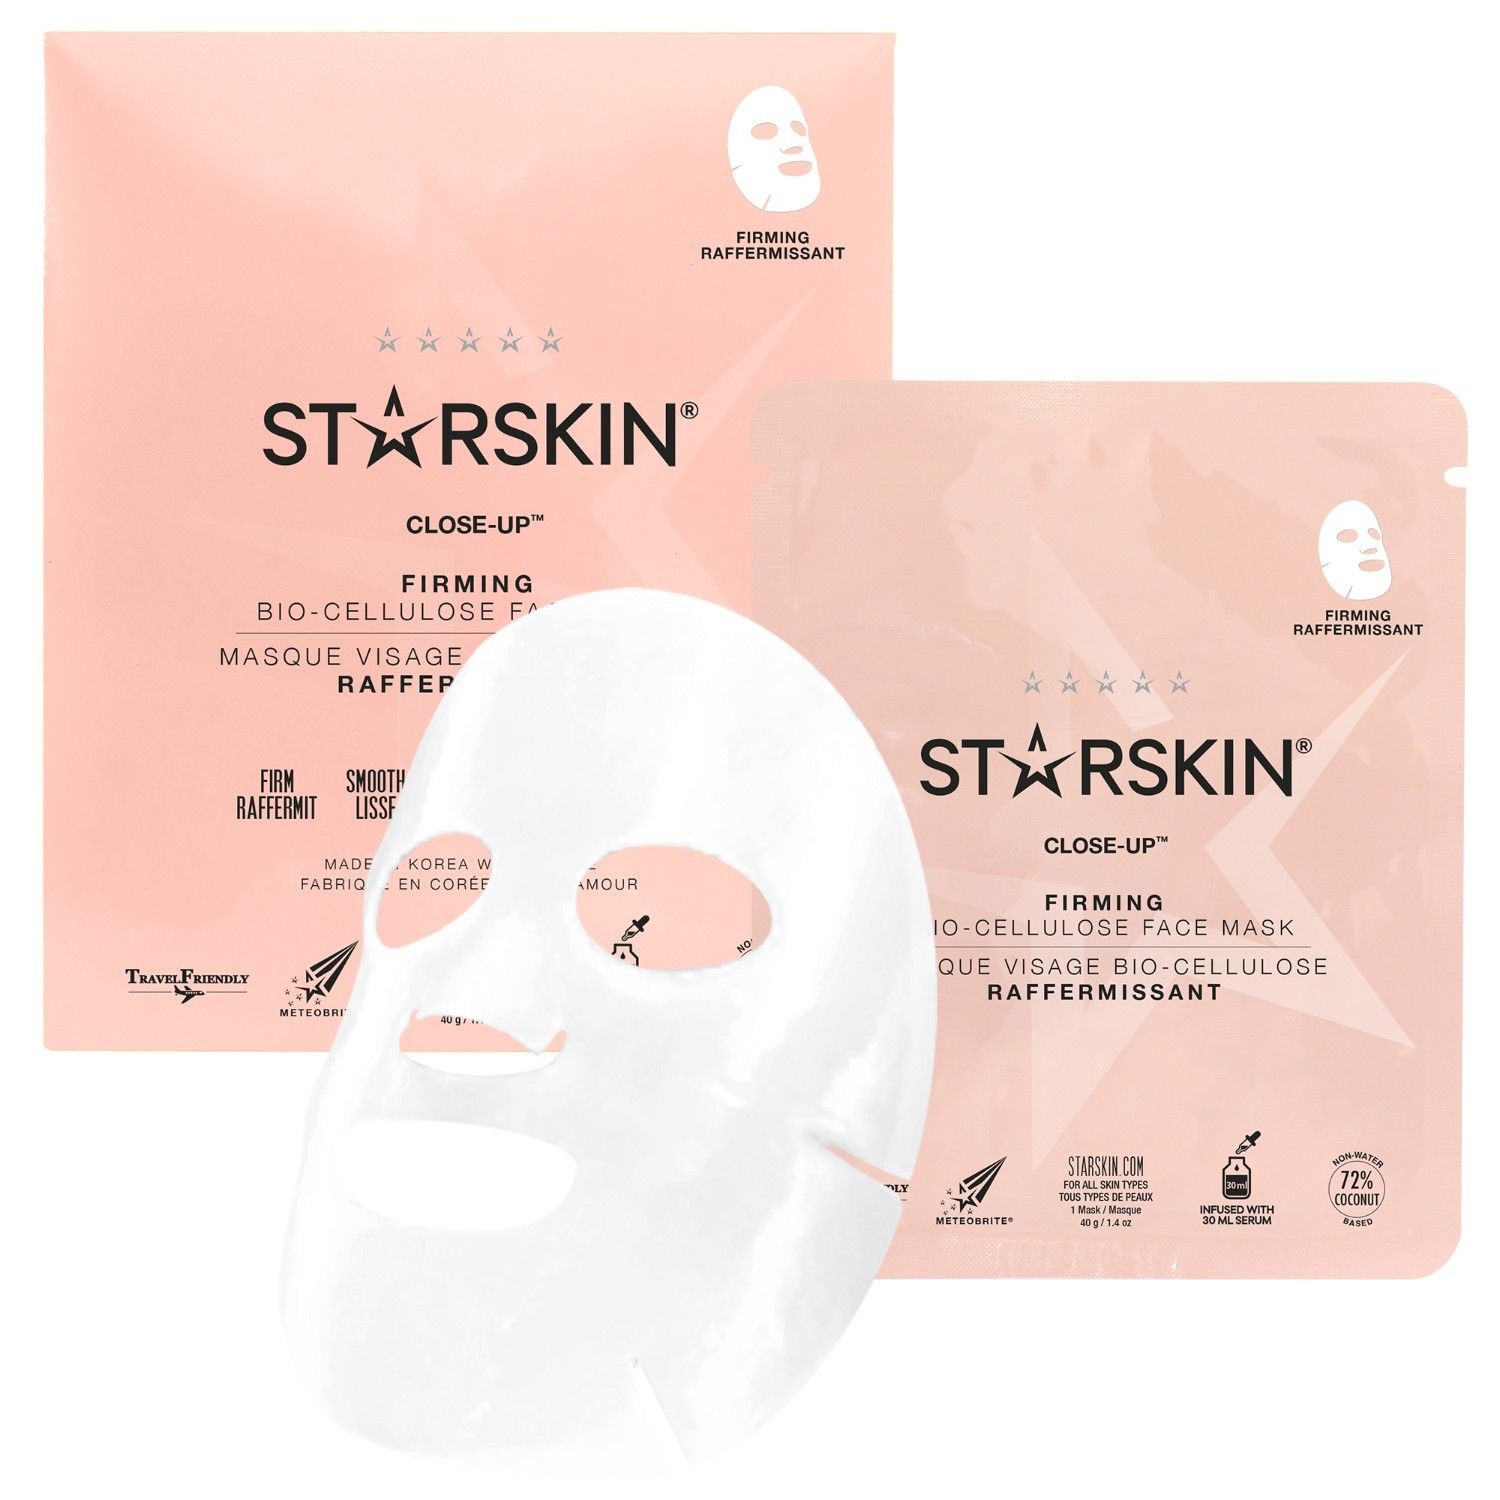 Close-Up - Firming Bio-Cellulose Face Mask